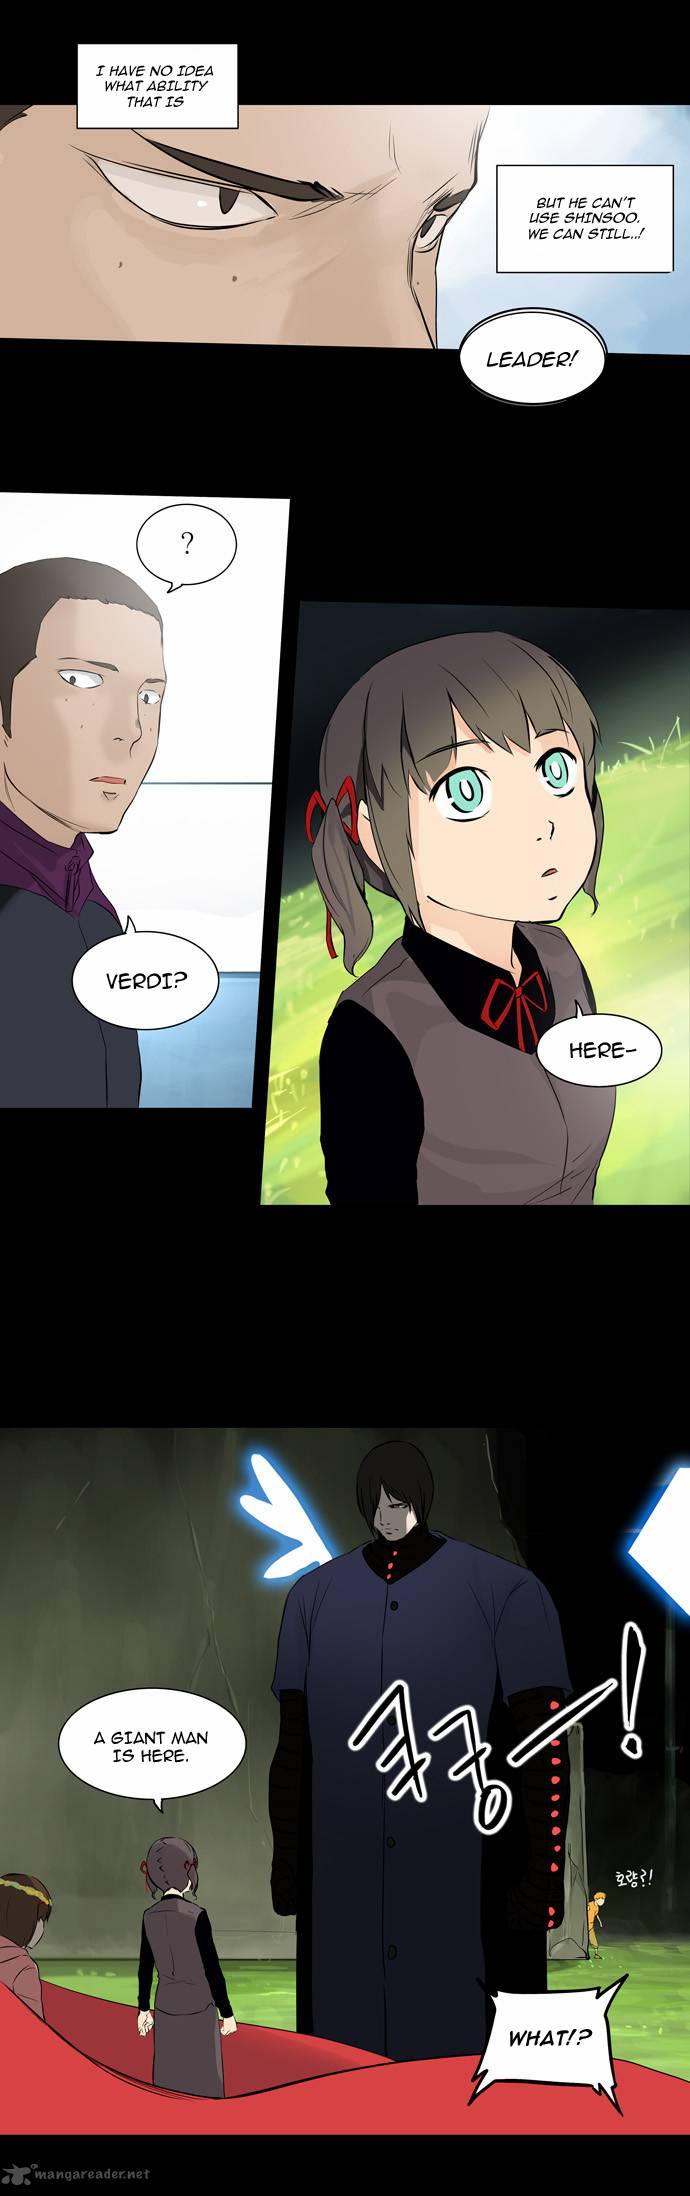 Tower Of God 145 8